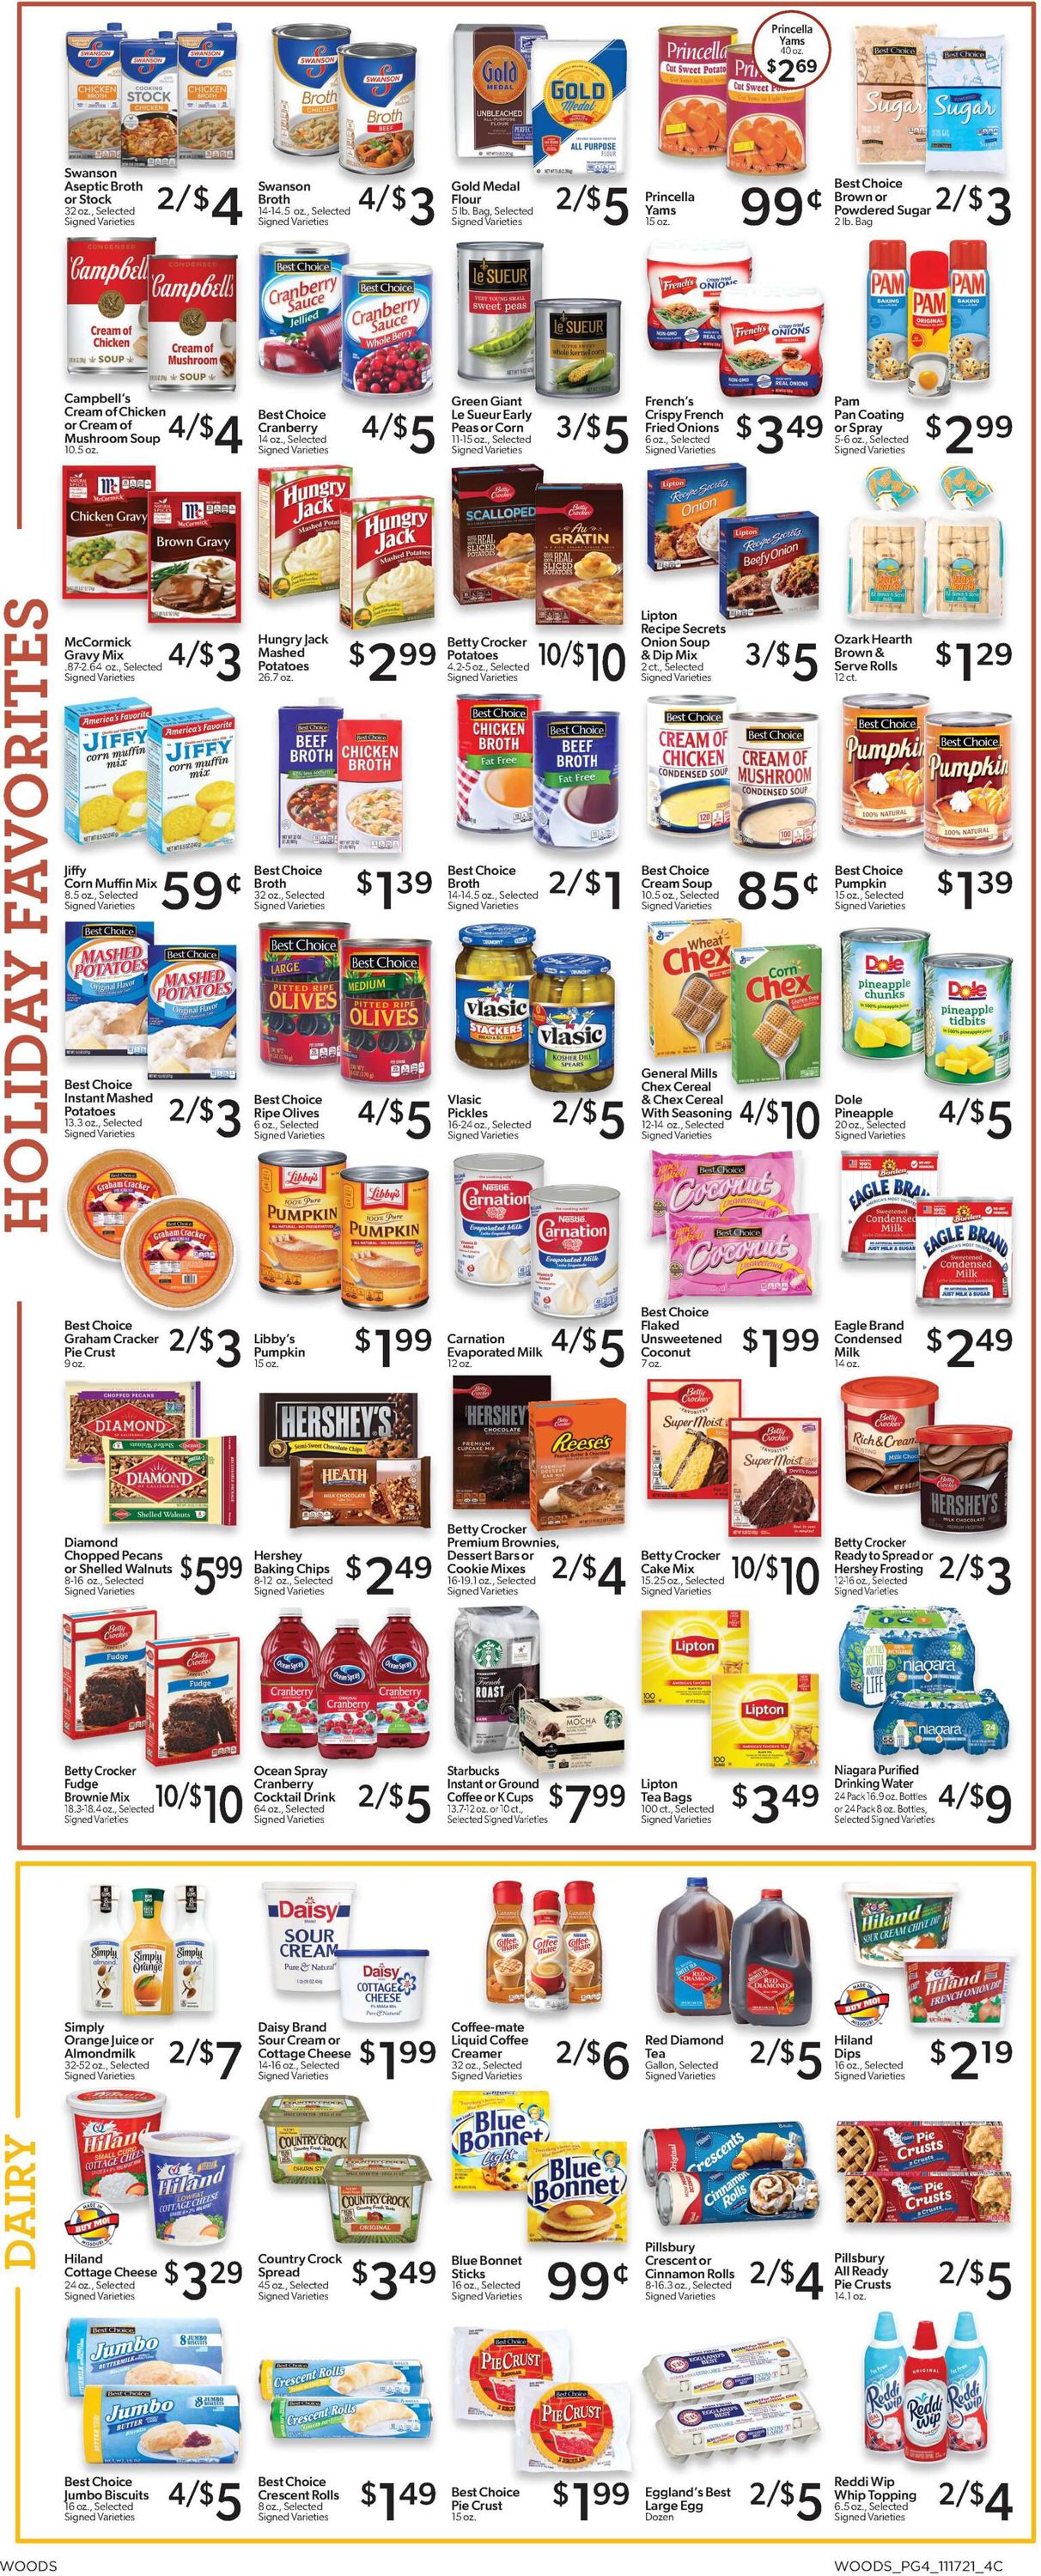 Catalogue Woods Supermarket THANKSGIVING 2021 from 11/17/2021